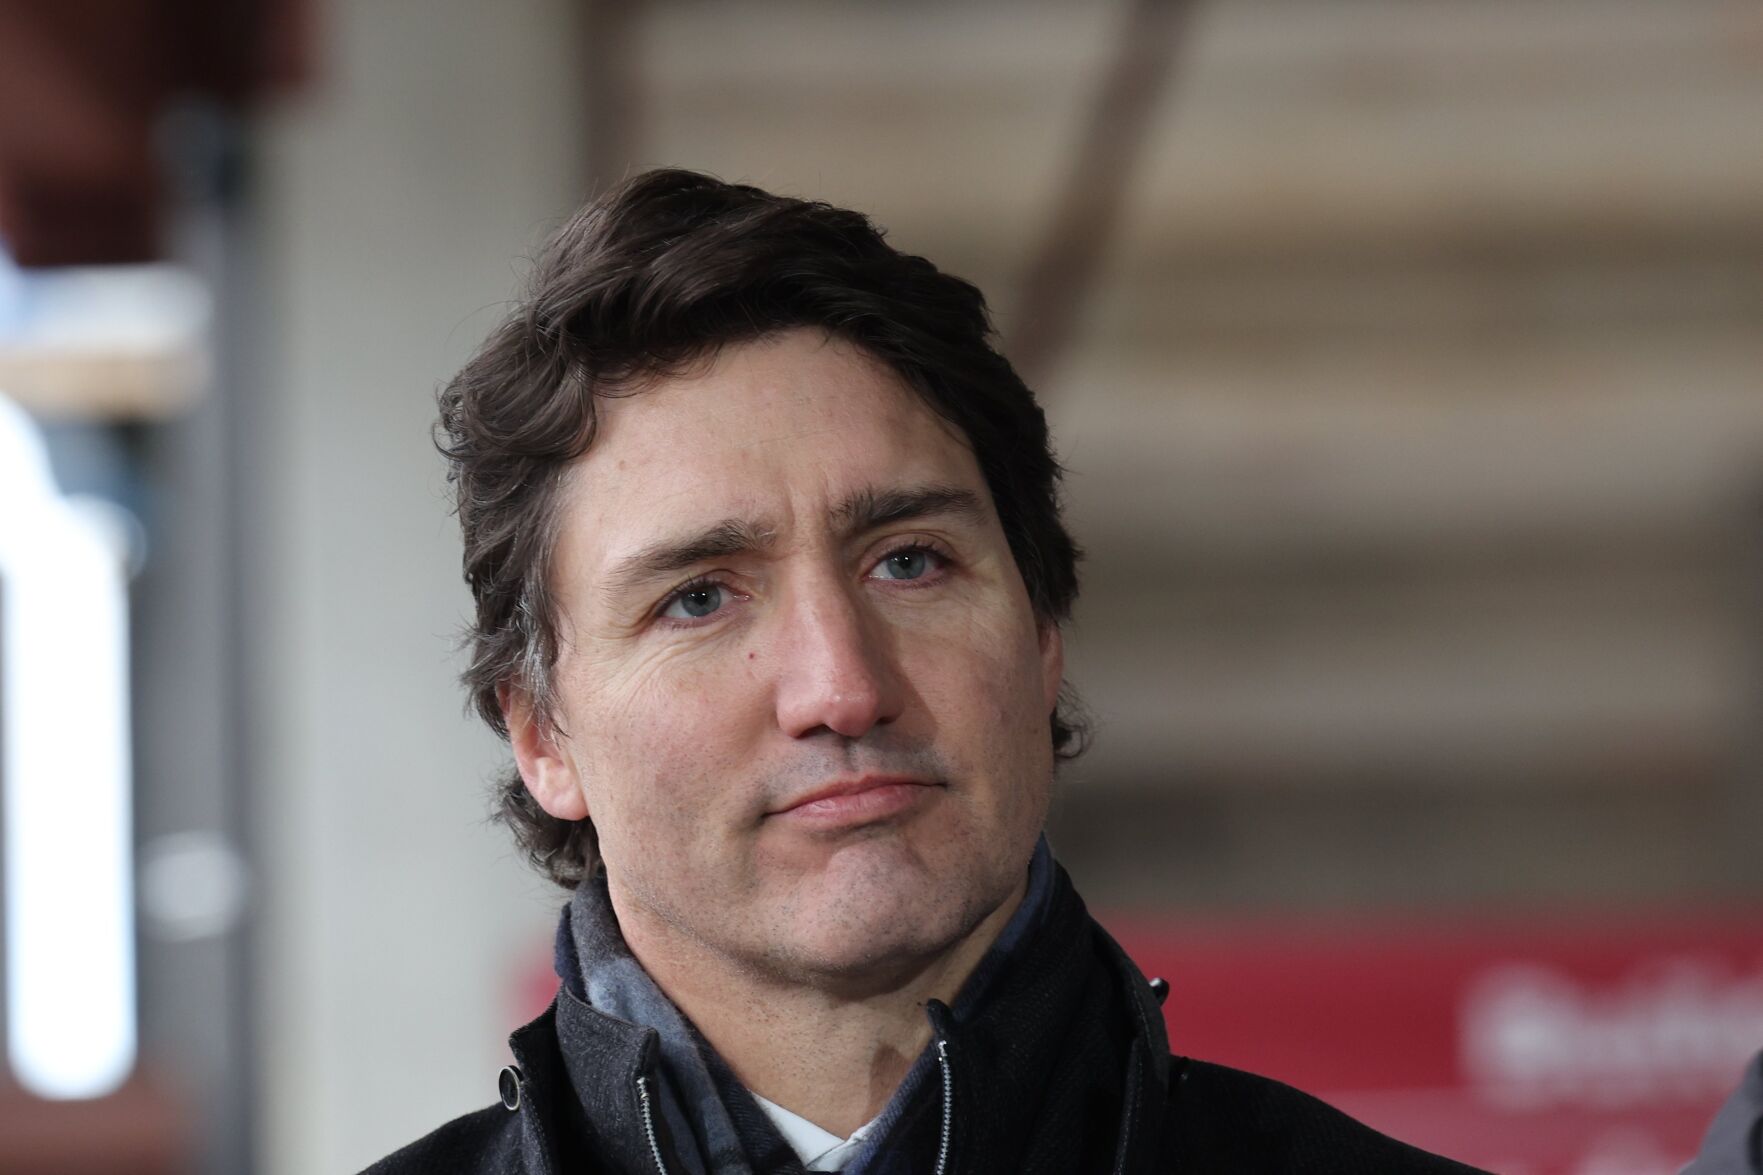 Government defends another free vacation for Justin Trudeau at luxury resort: ‘All of the rules have been followed’